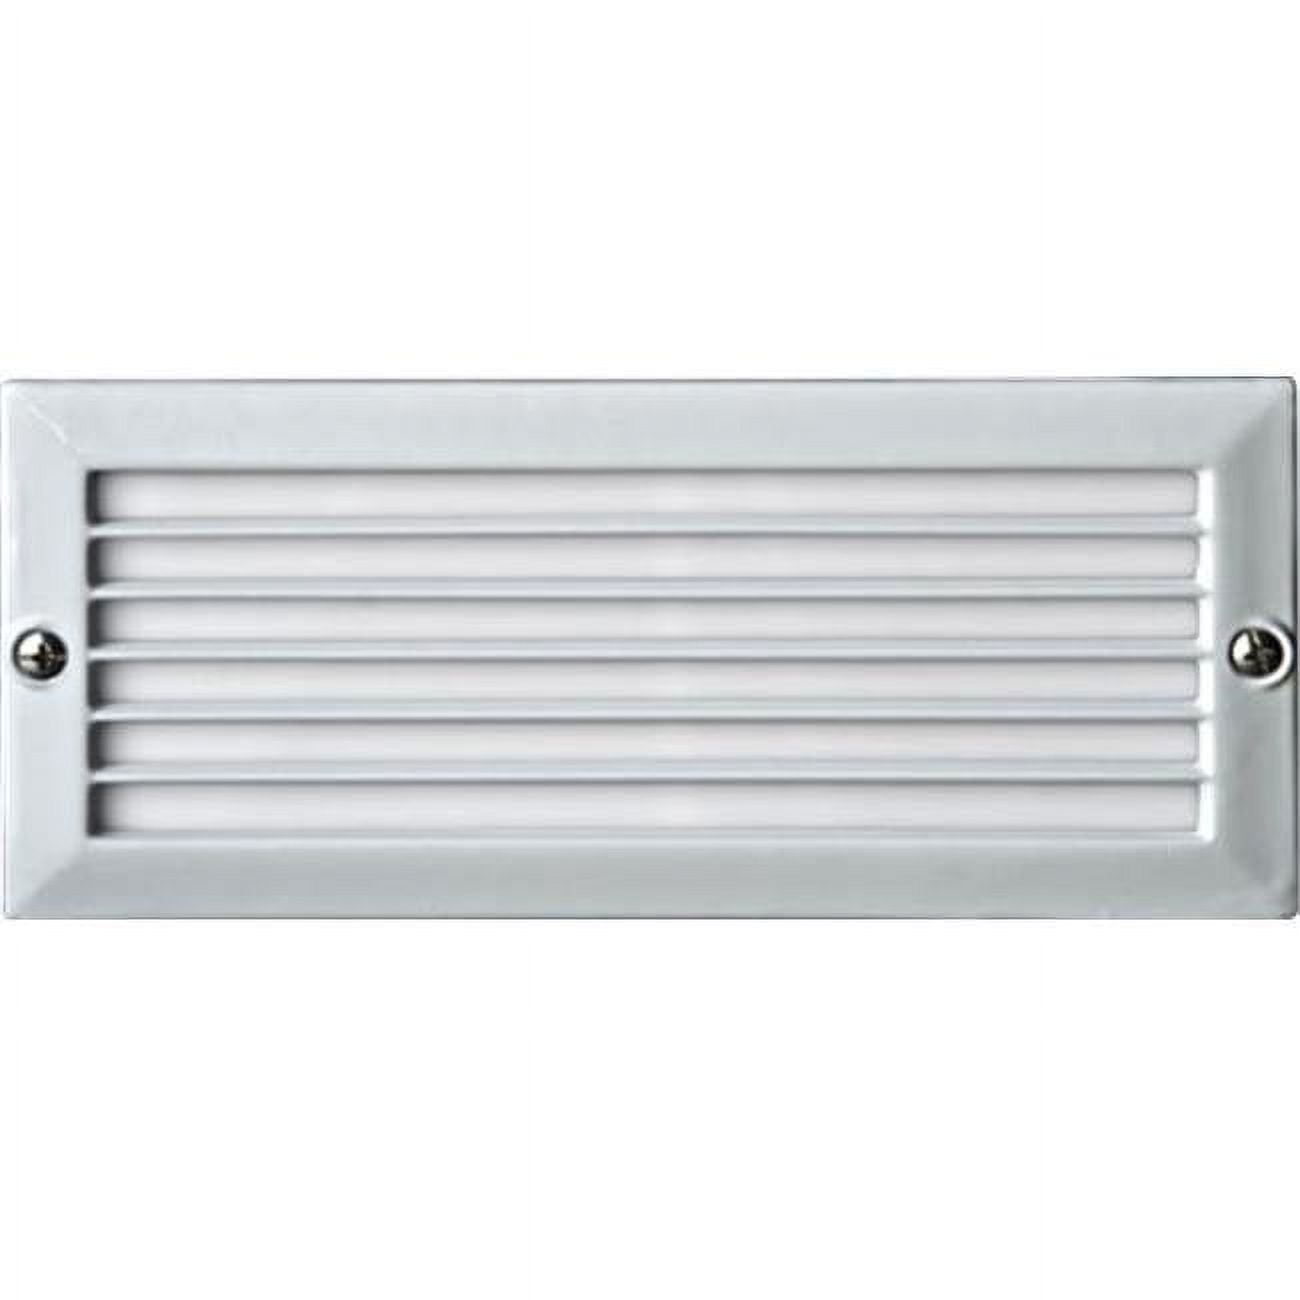 Picture of Dabmar Lighting LV601-W Cast Aluminum Recessed Louvered Brick, Step & Wall Light, White - 4 x 9.13 x 3.25 in.